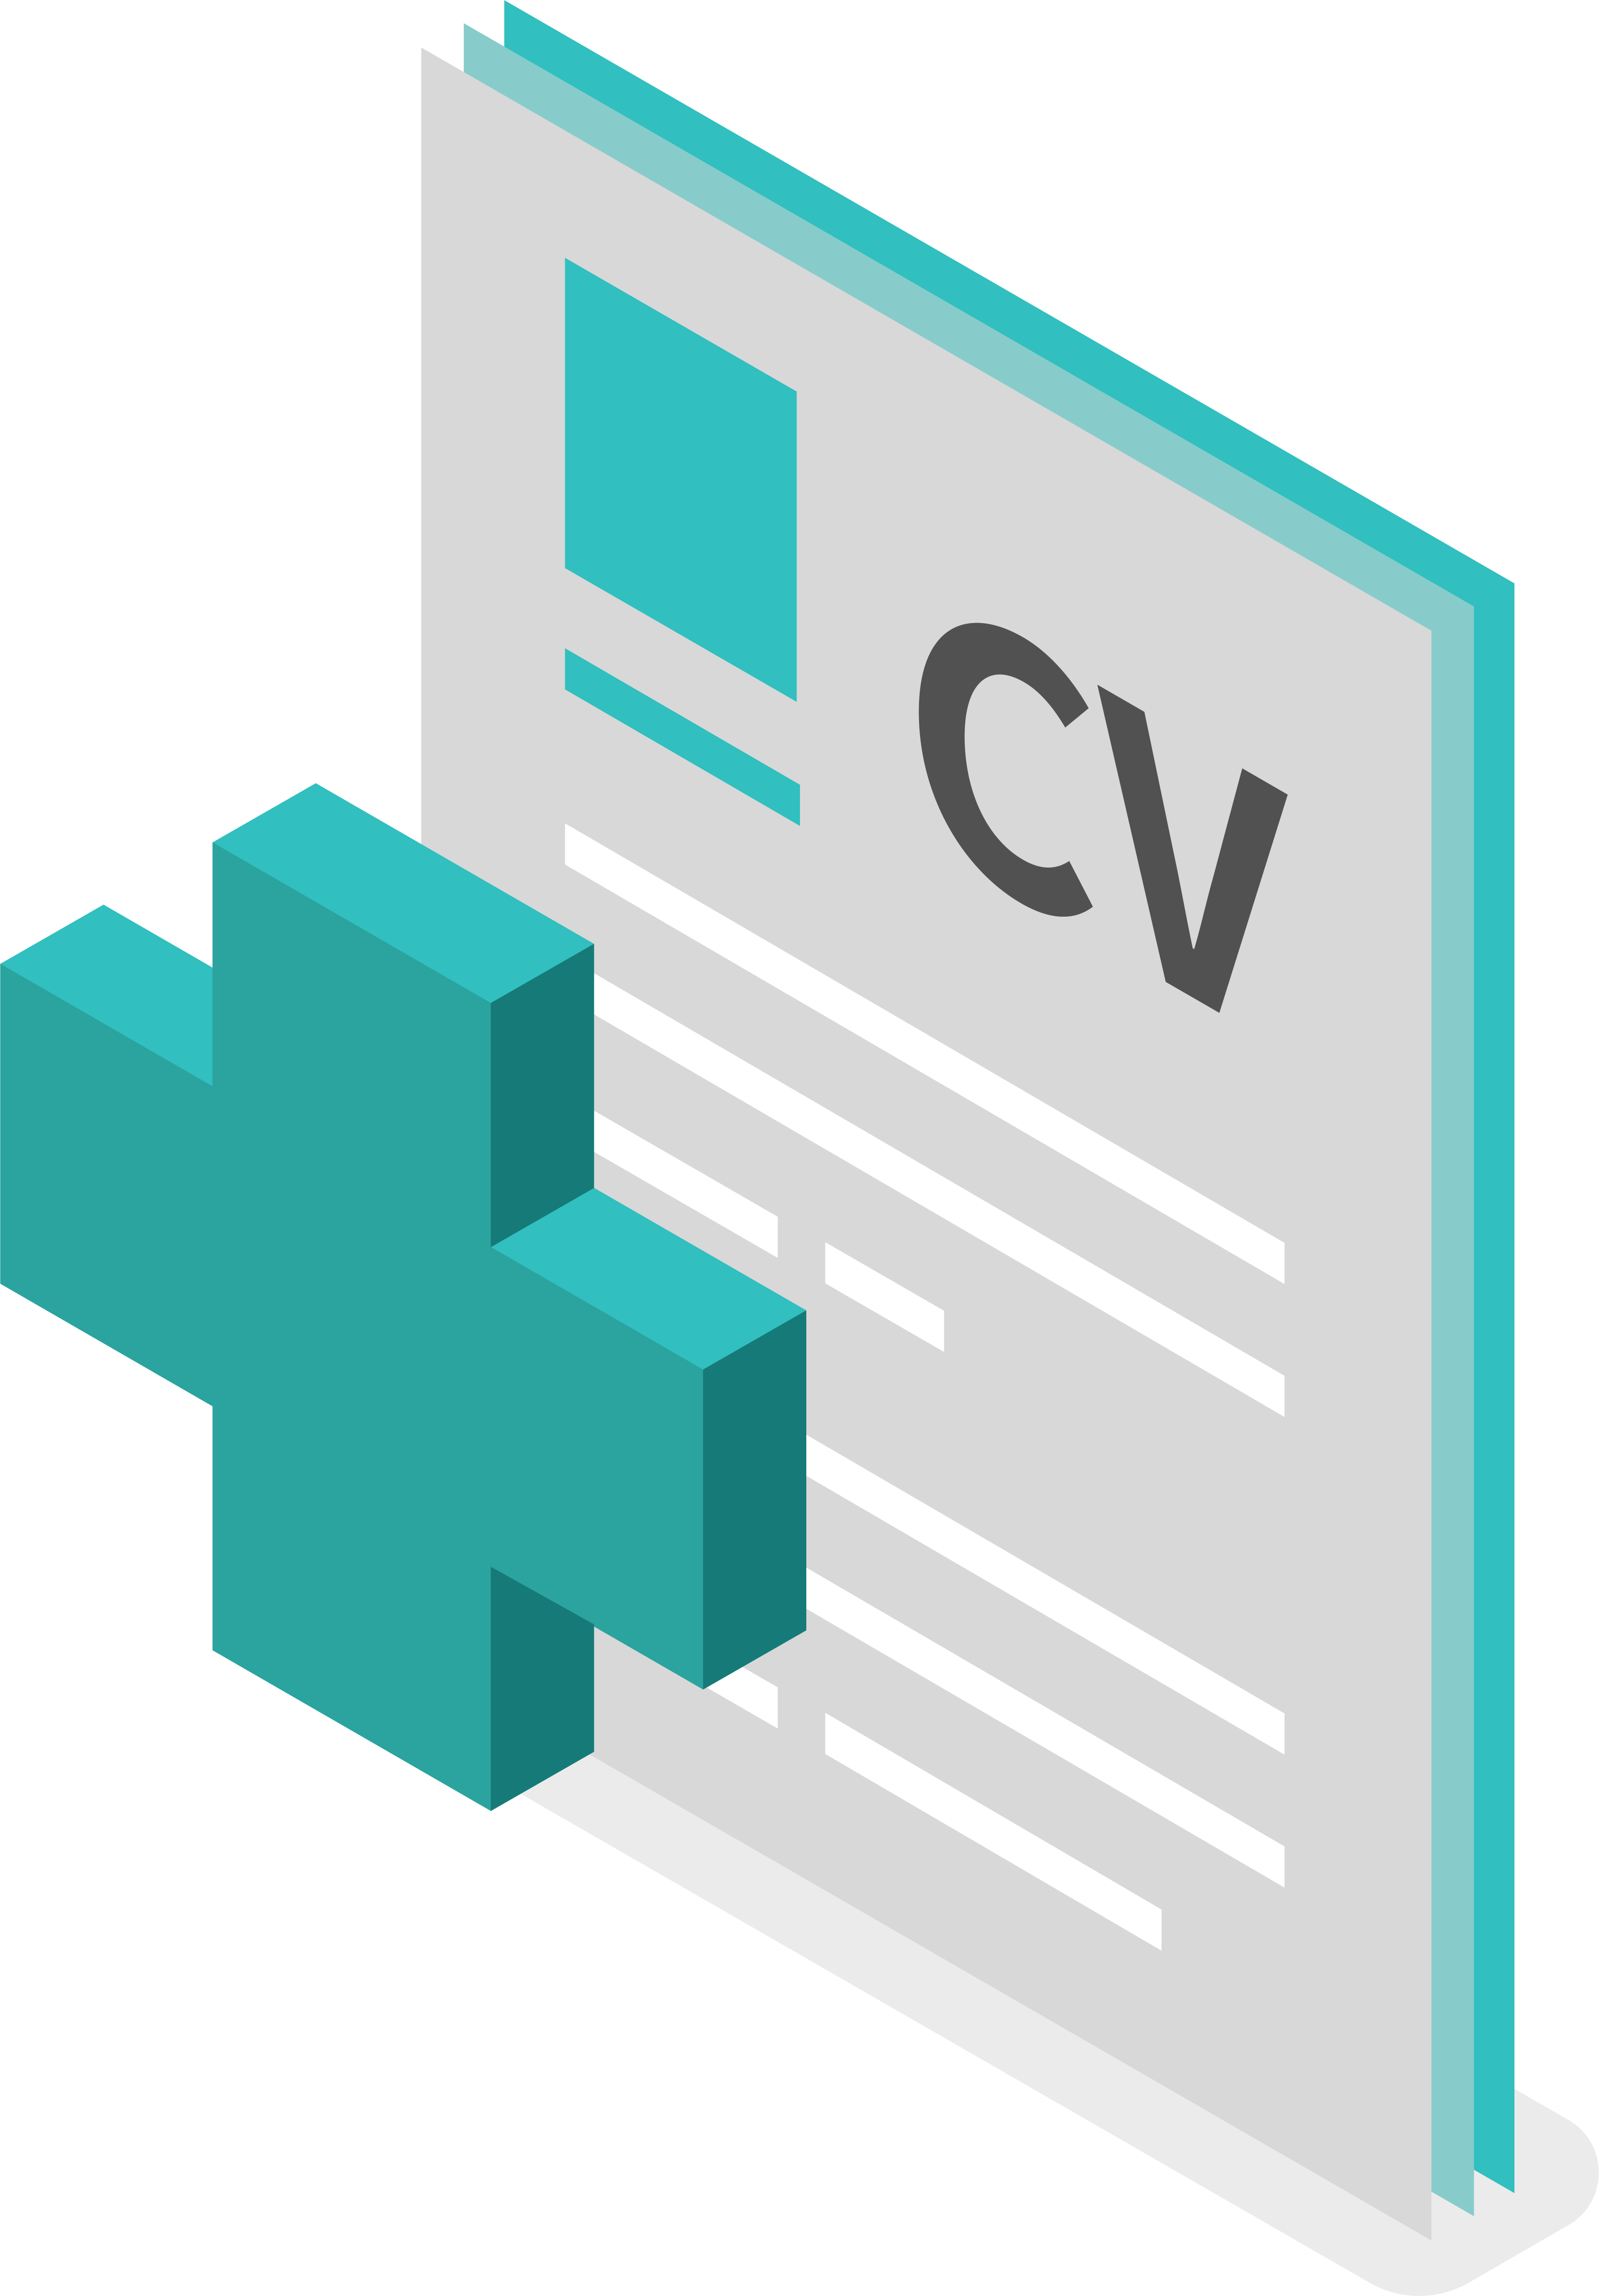 resume and cover letter service perth